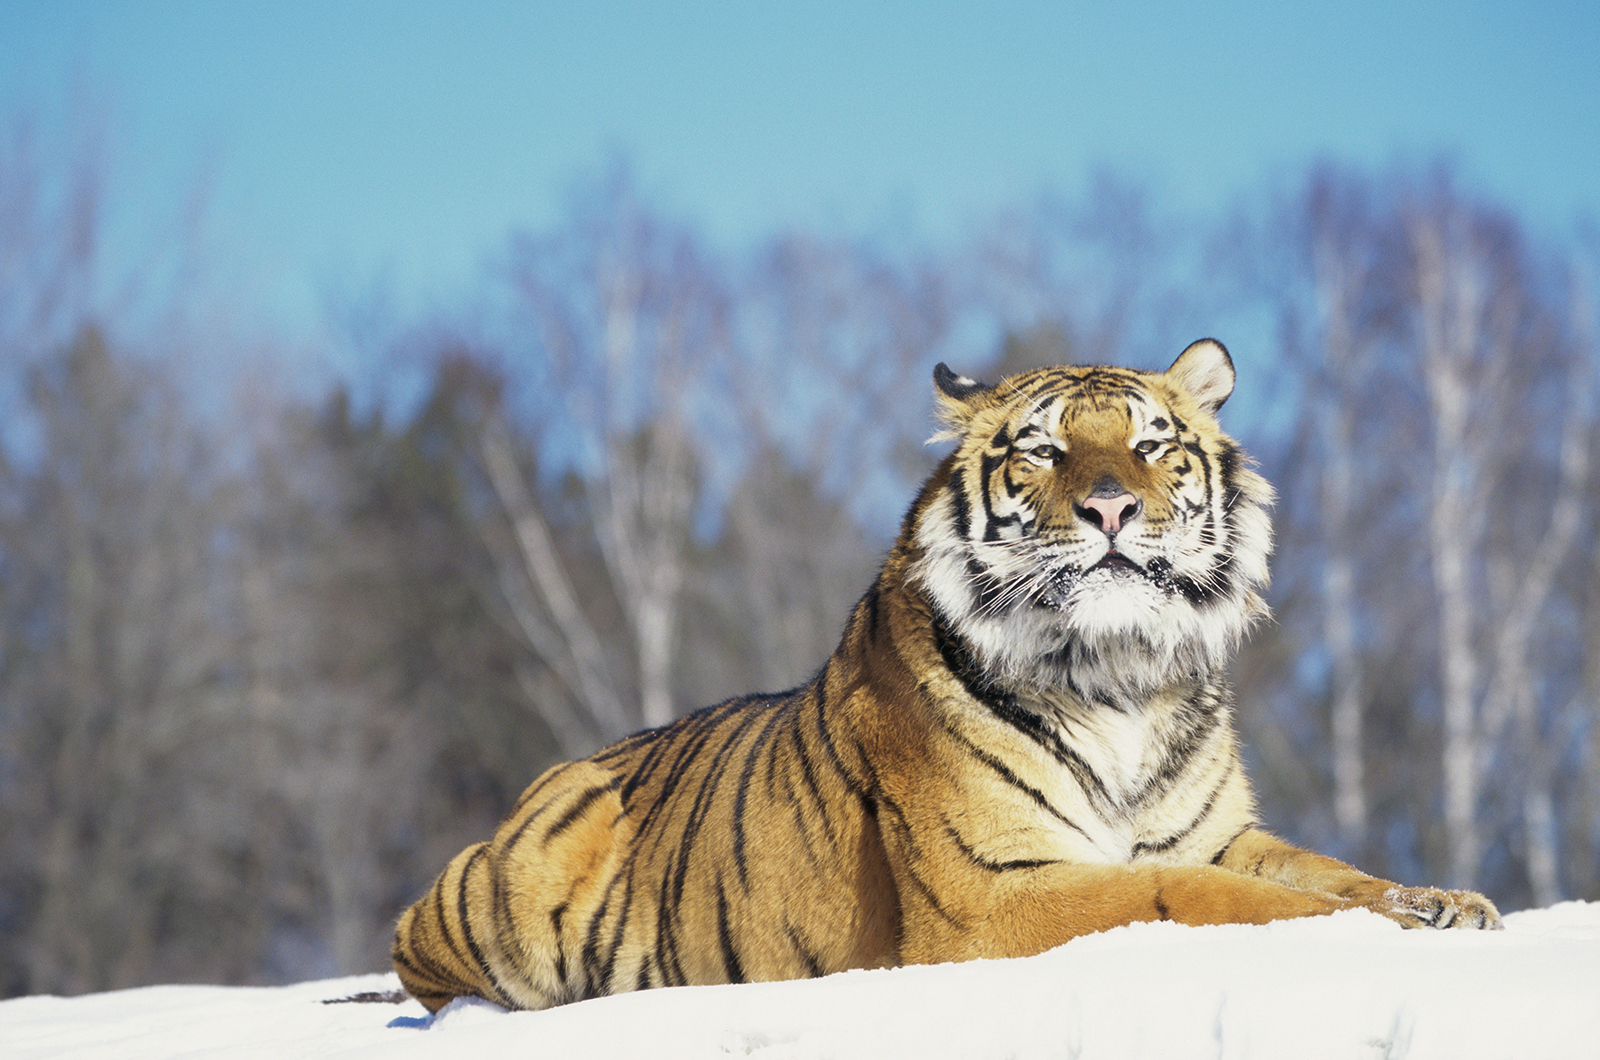 Siberian Tiger lying in the snow (Panthera tigris altaica)